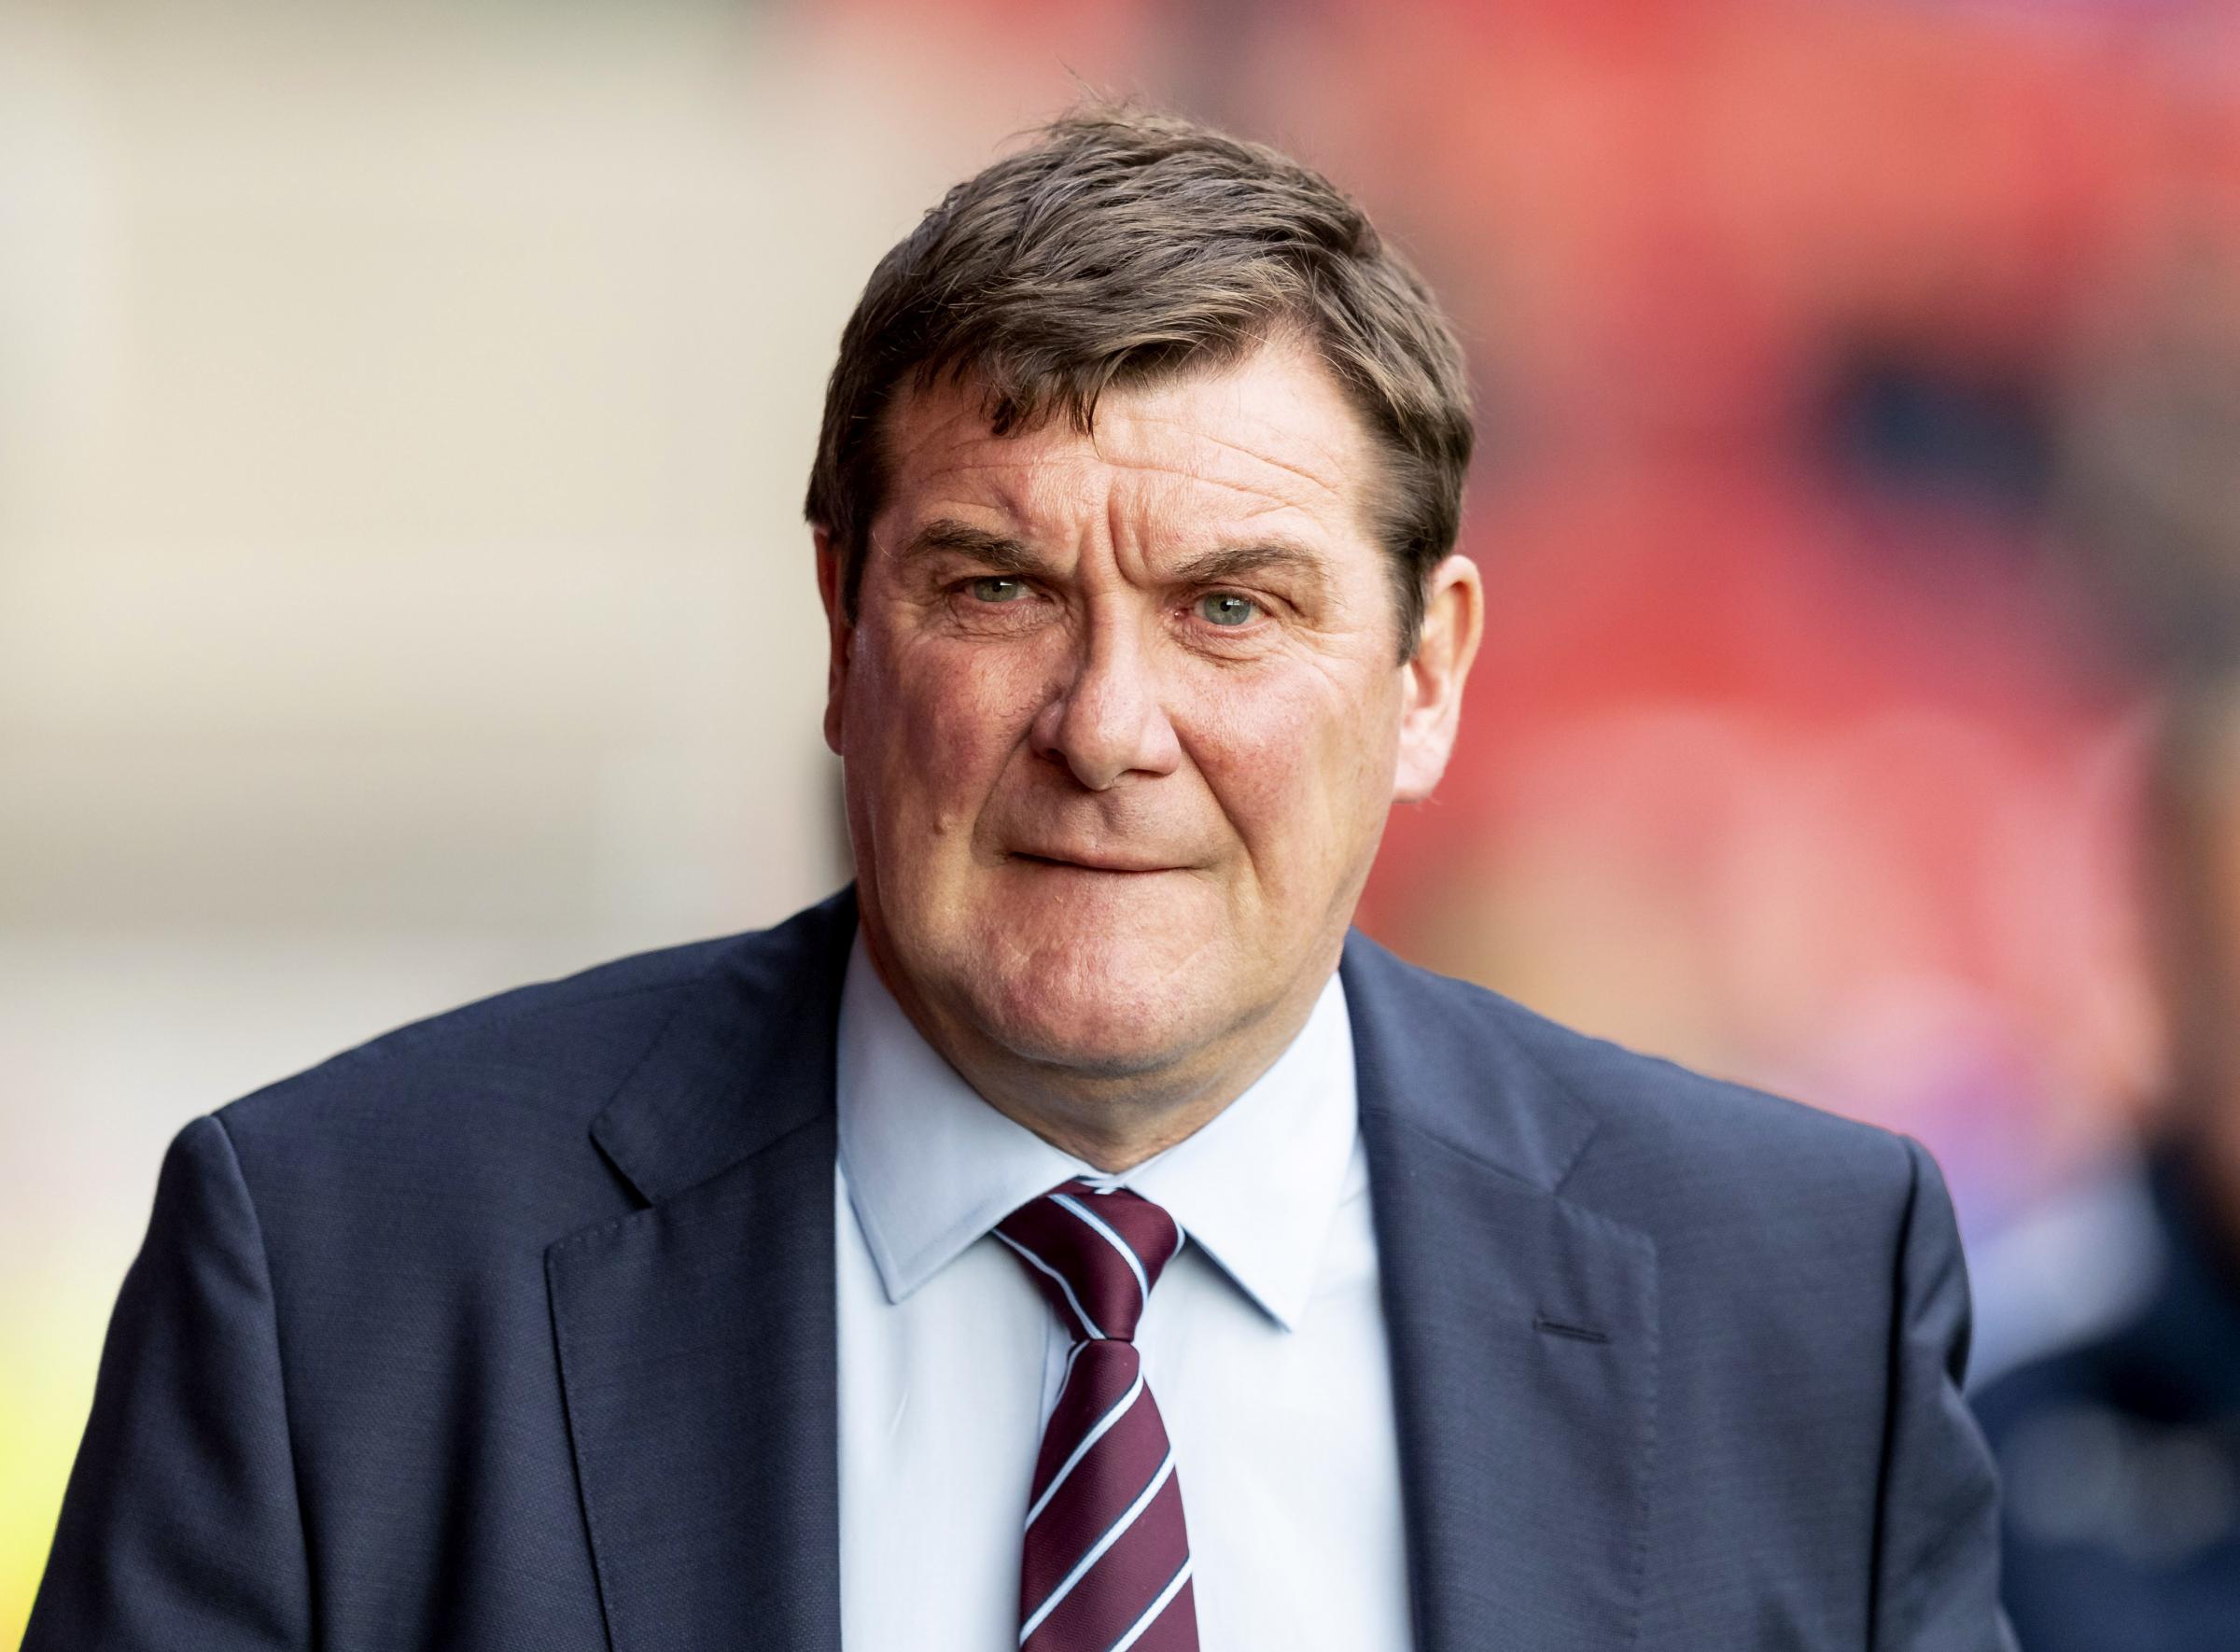 Former St Johnstone boss Tommy Wright agrees deal to join Kilmarnock as manager